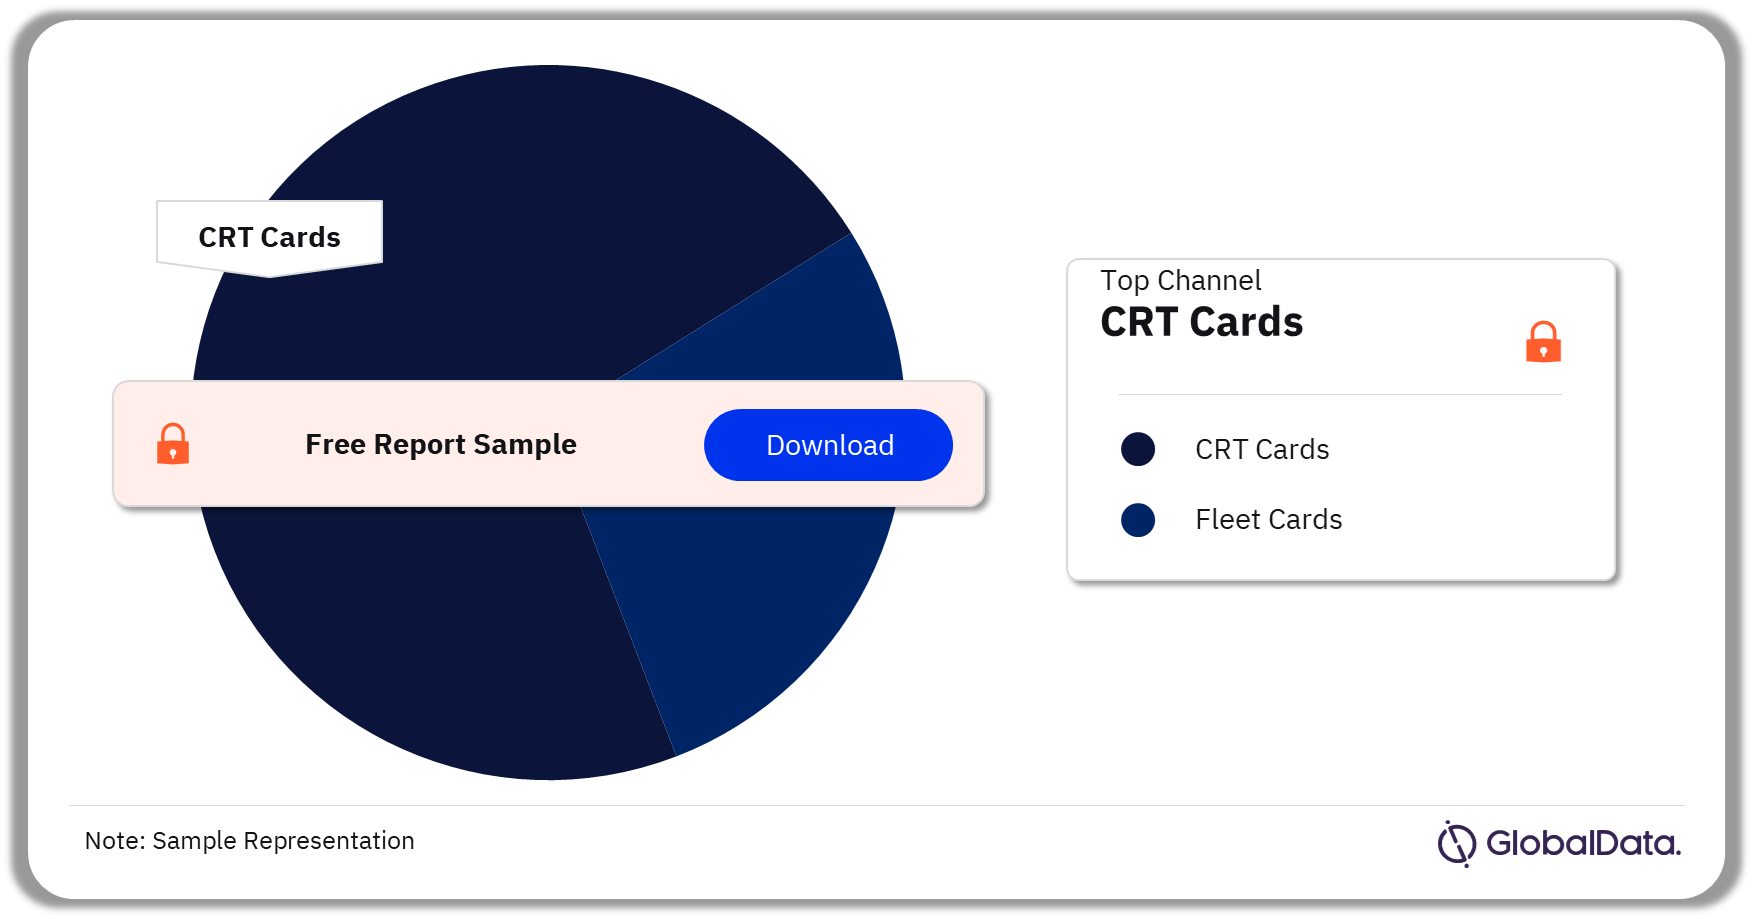 Greece Fuel Cards Market Analysis by Channels, 2022 (%)